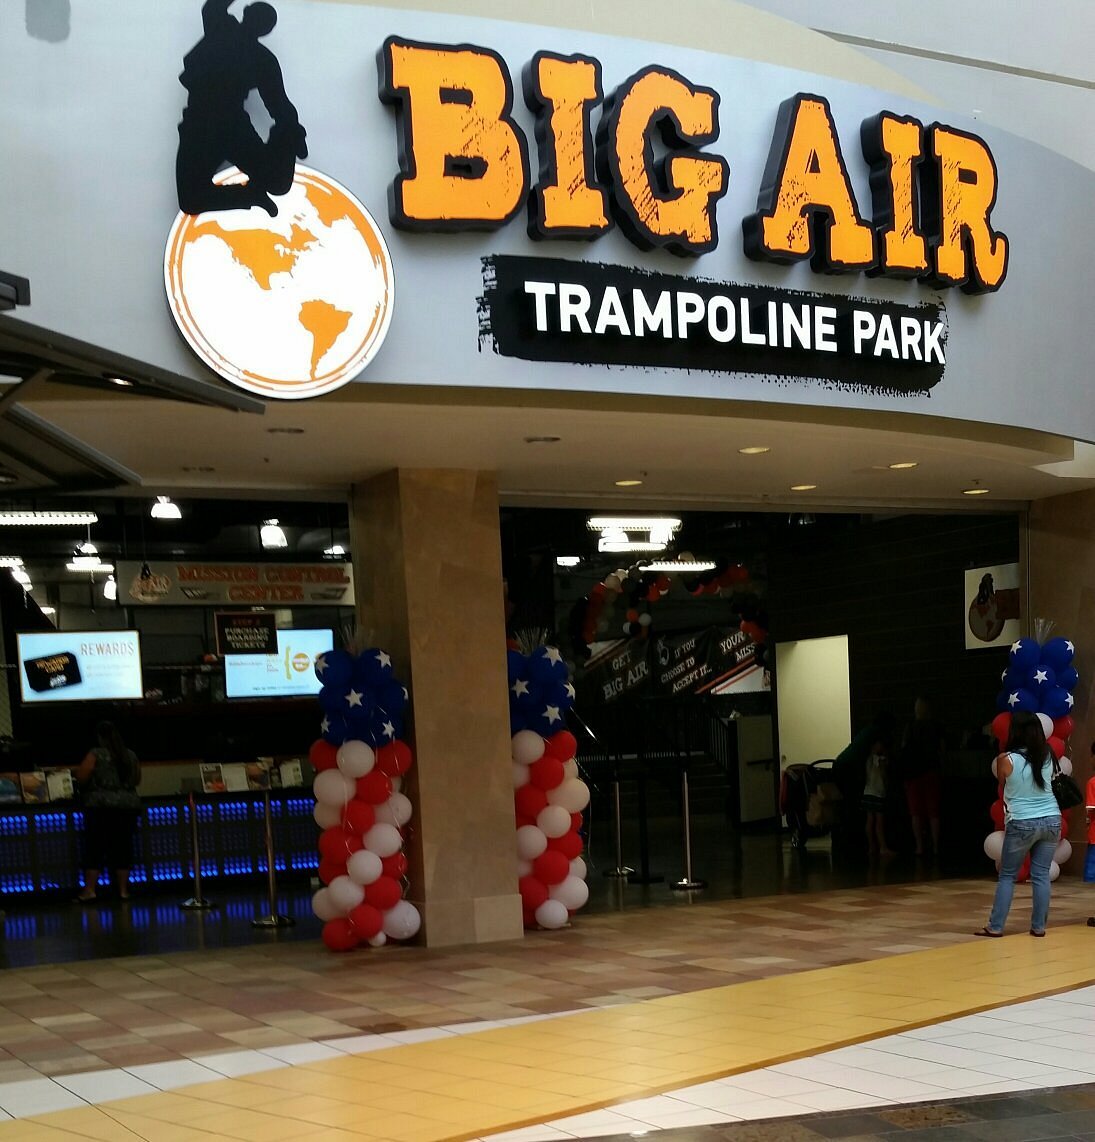 Trampoline Park (Buena Park) - All You Need to Know You